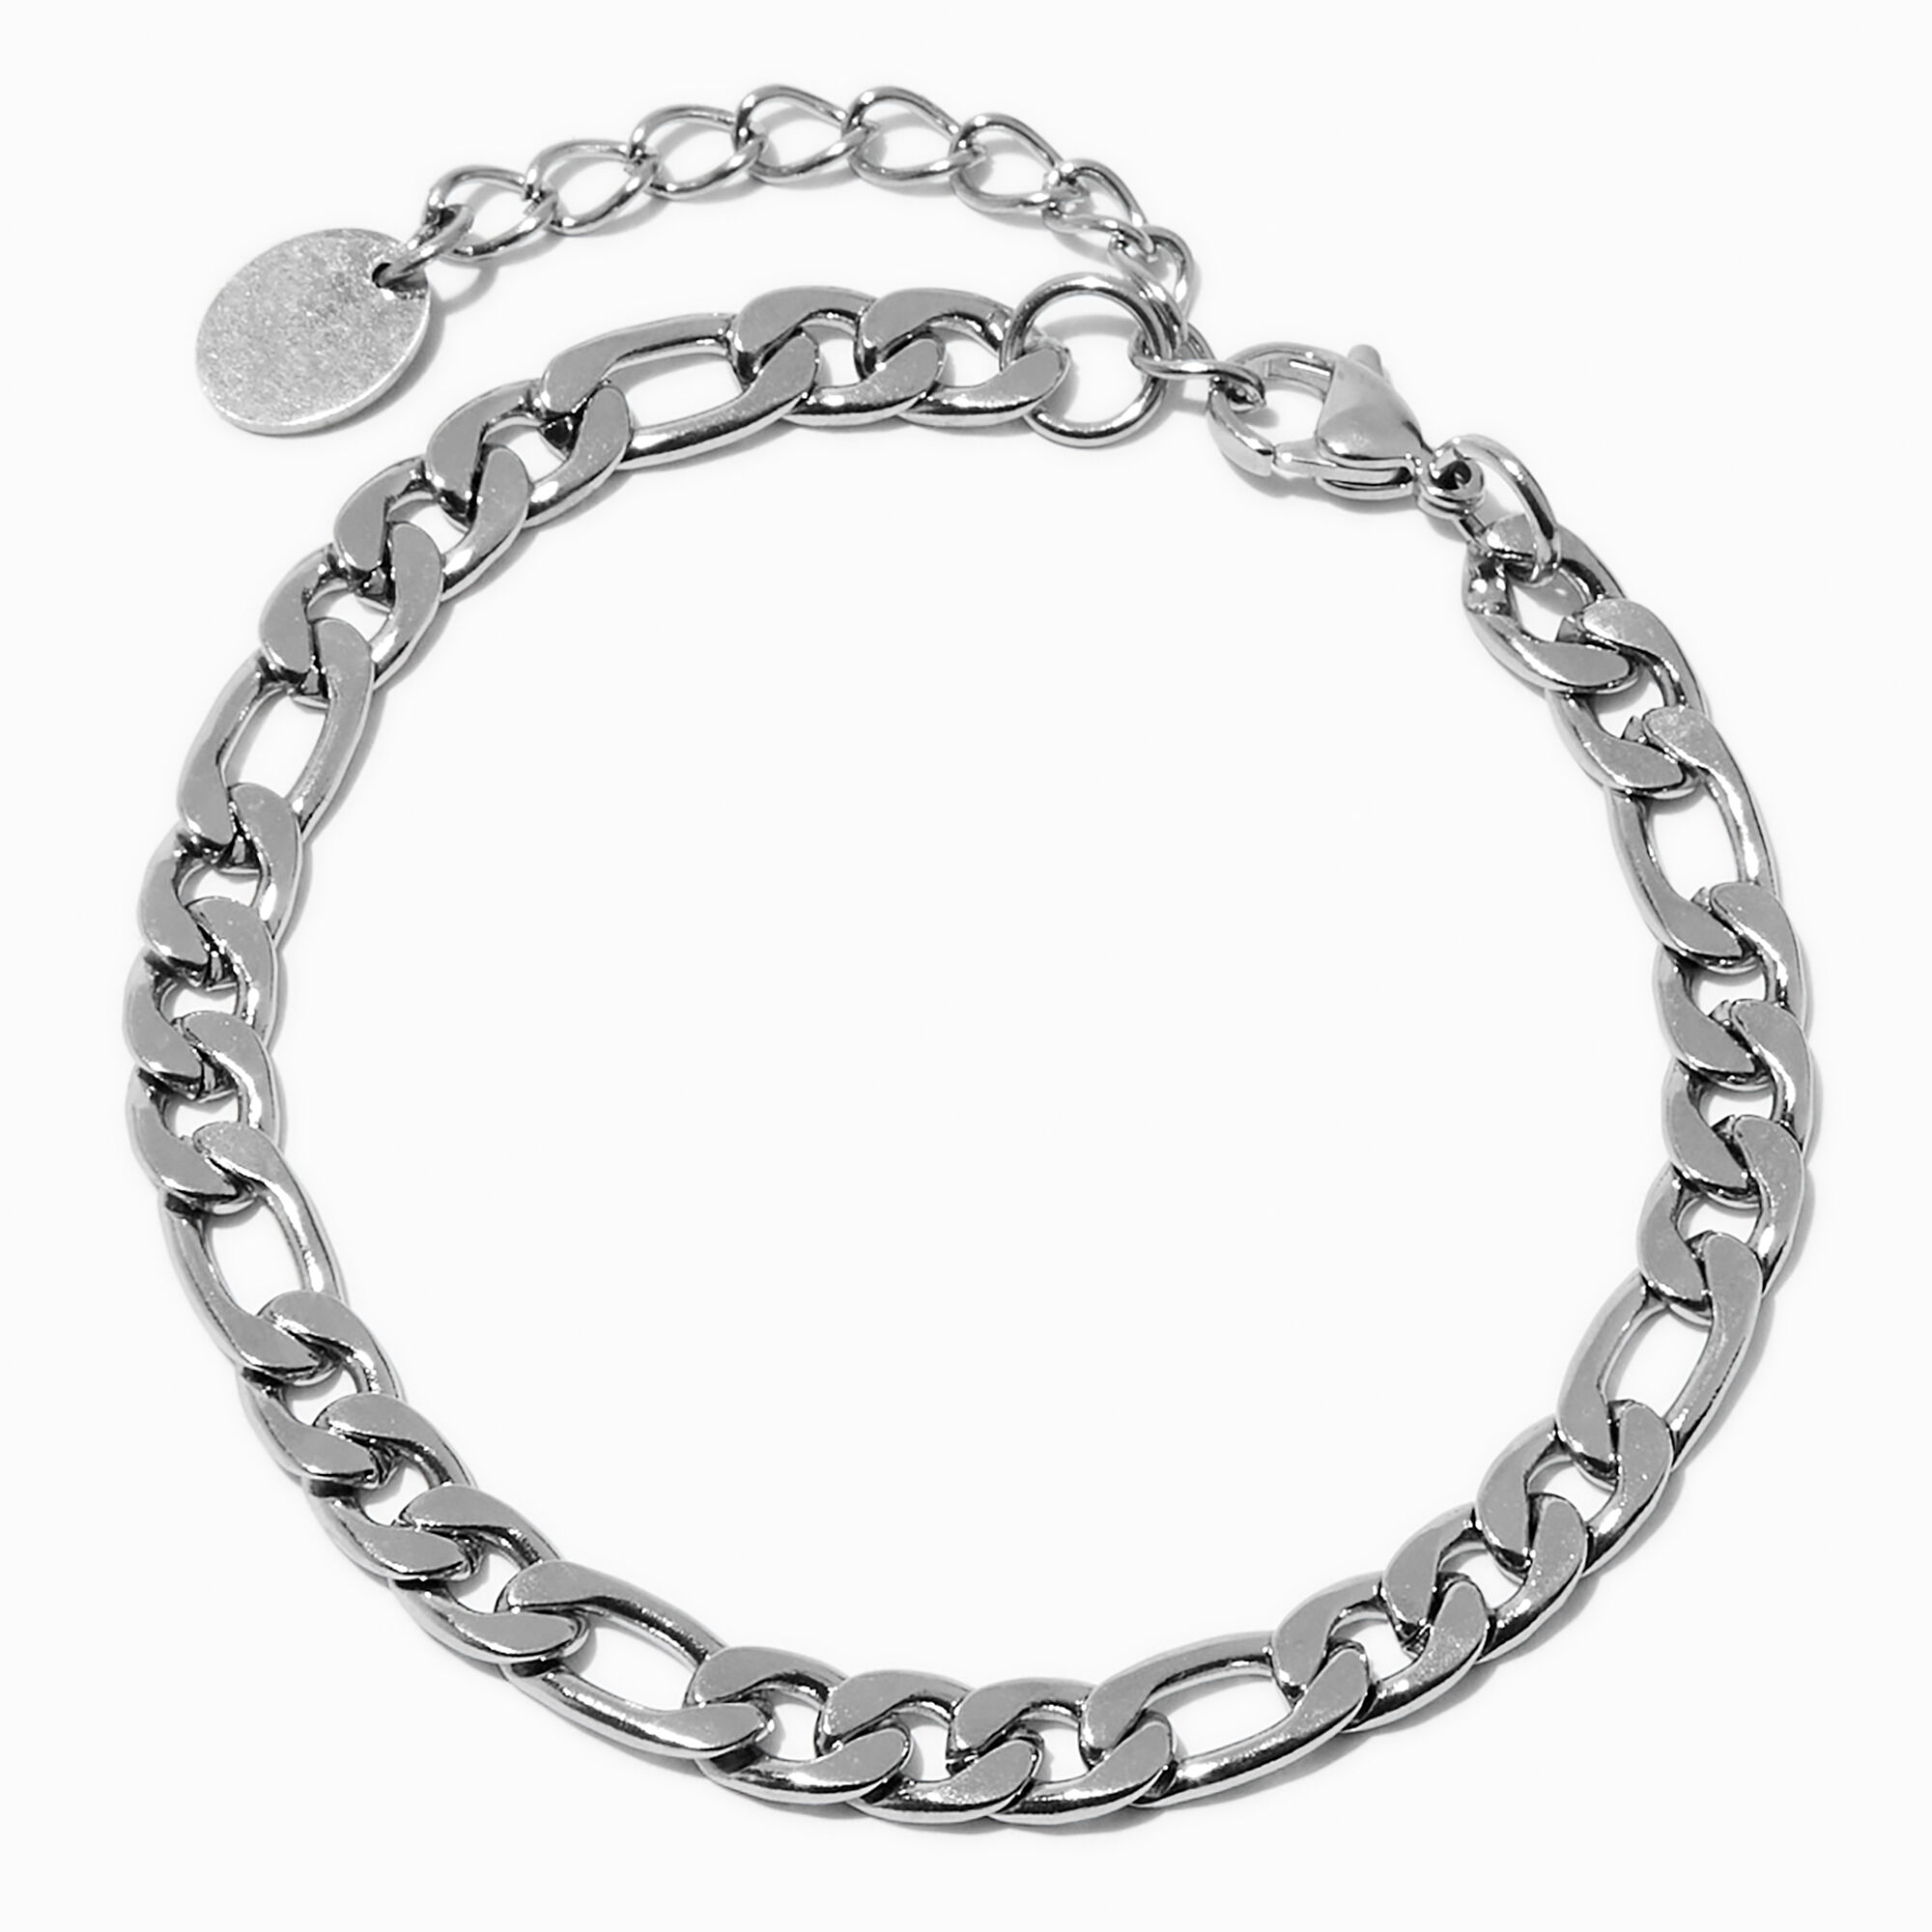 View Claires Tone Stainless Steel 6MM Figaro Chain Bracelet Silver information